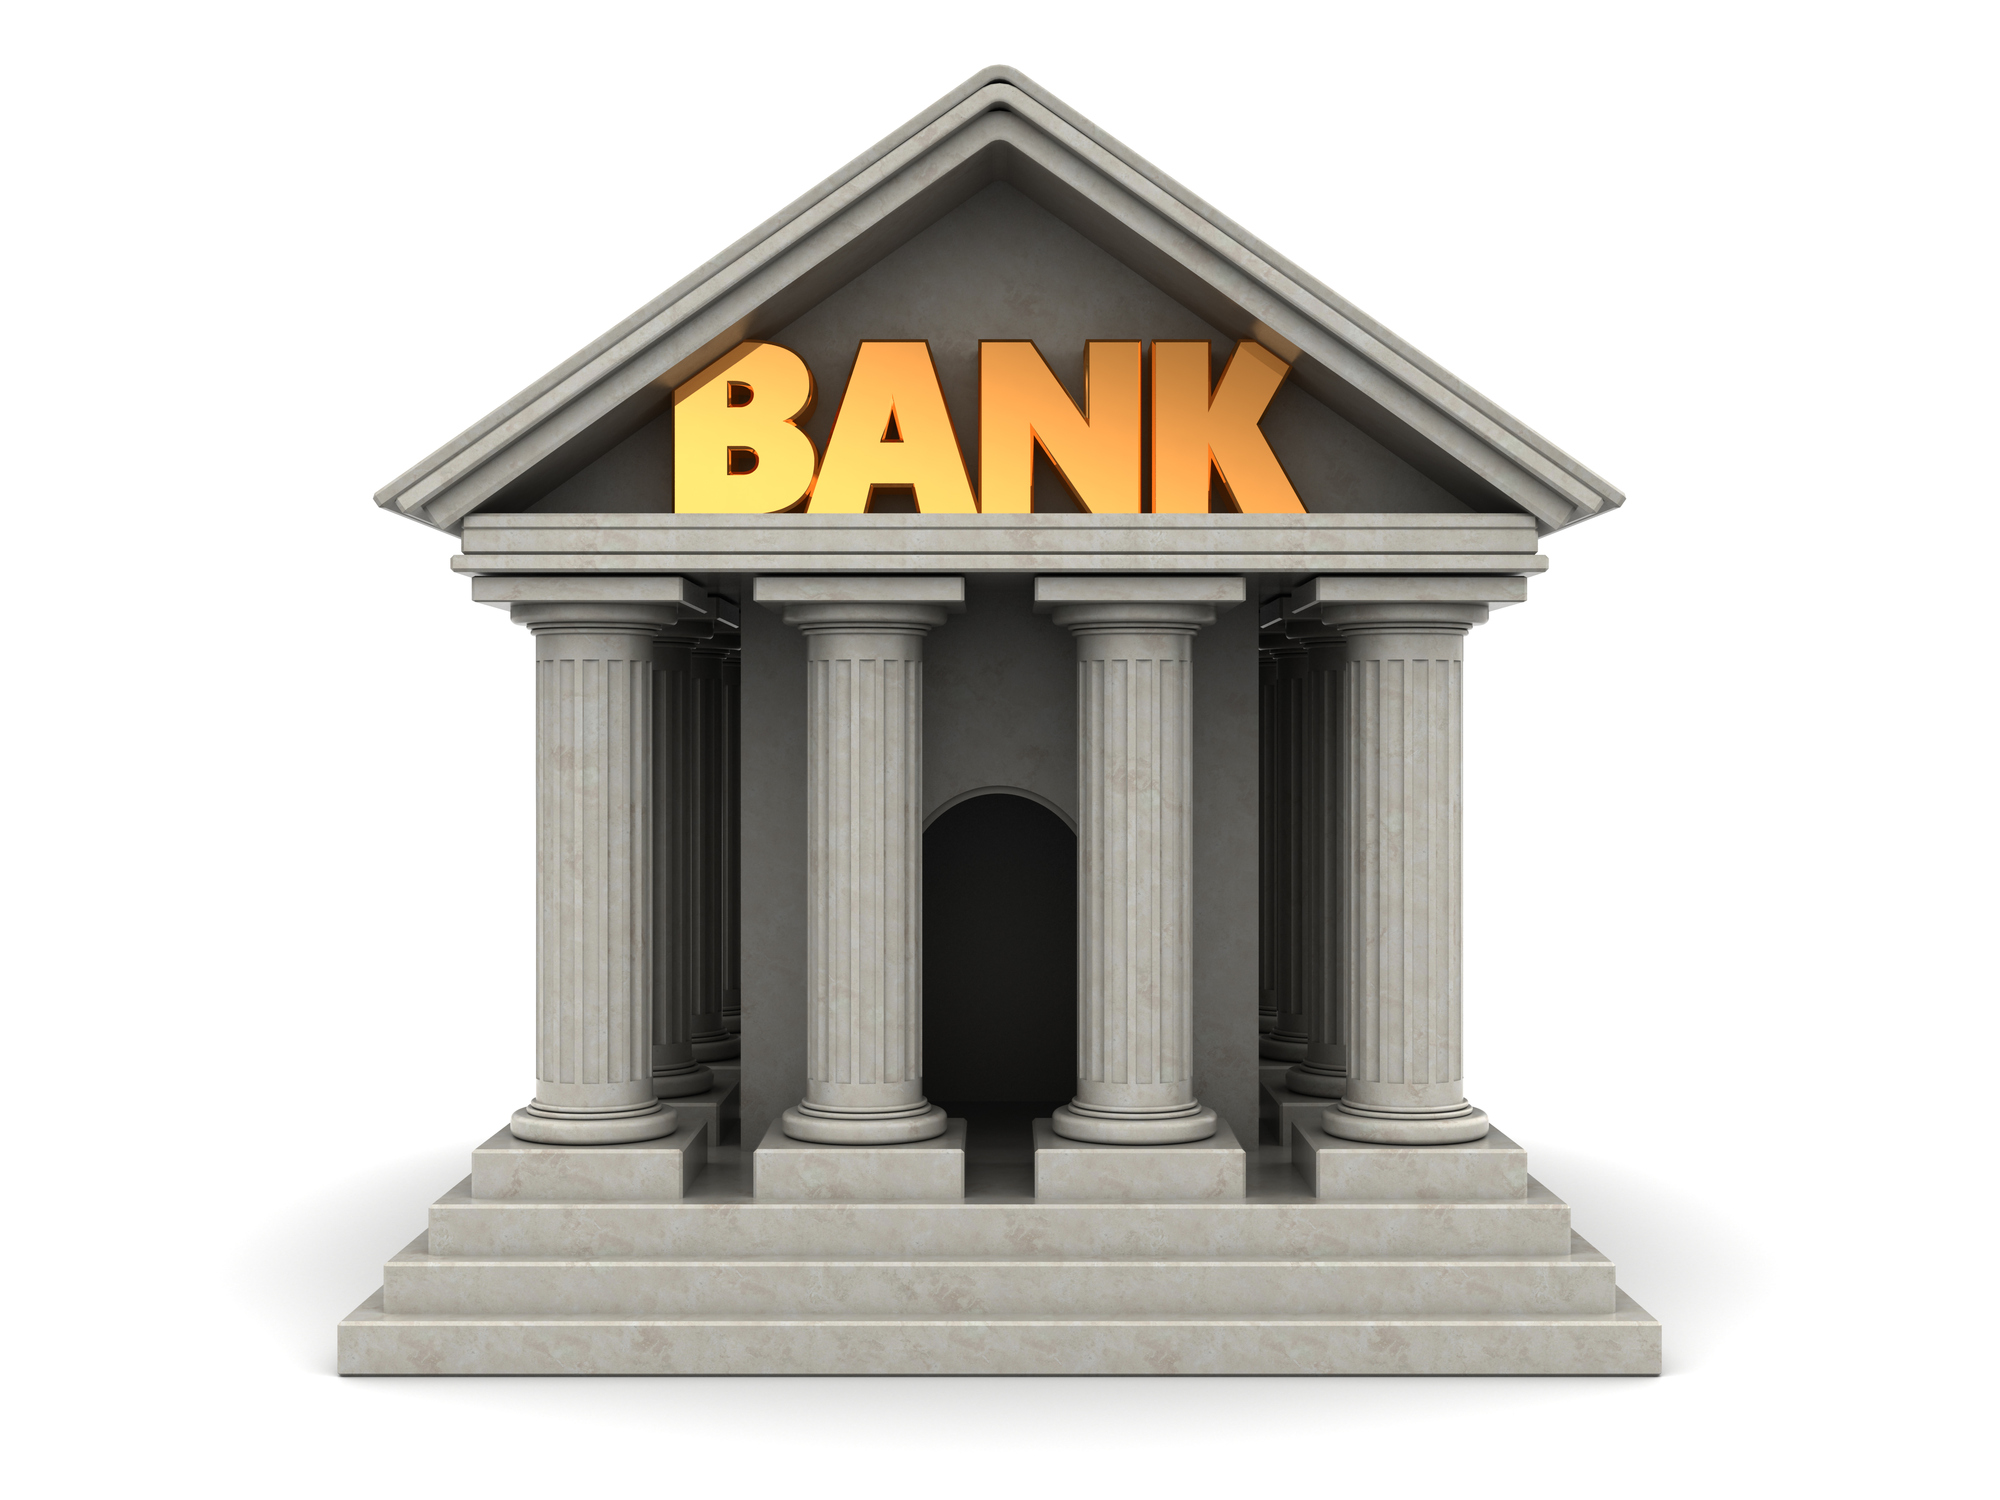 Image of a bank